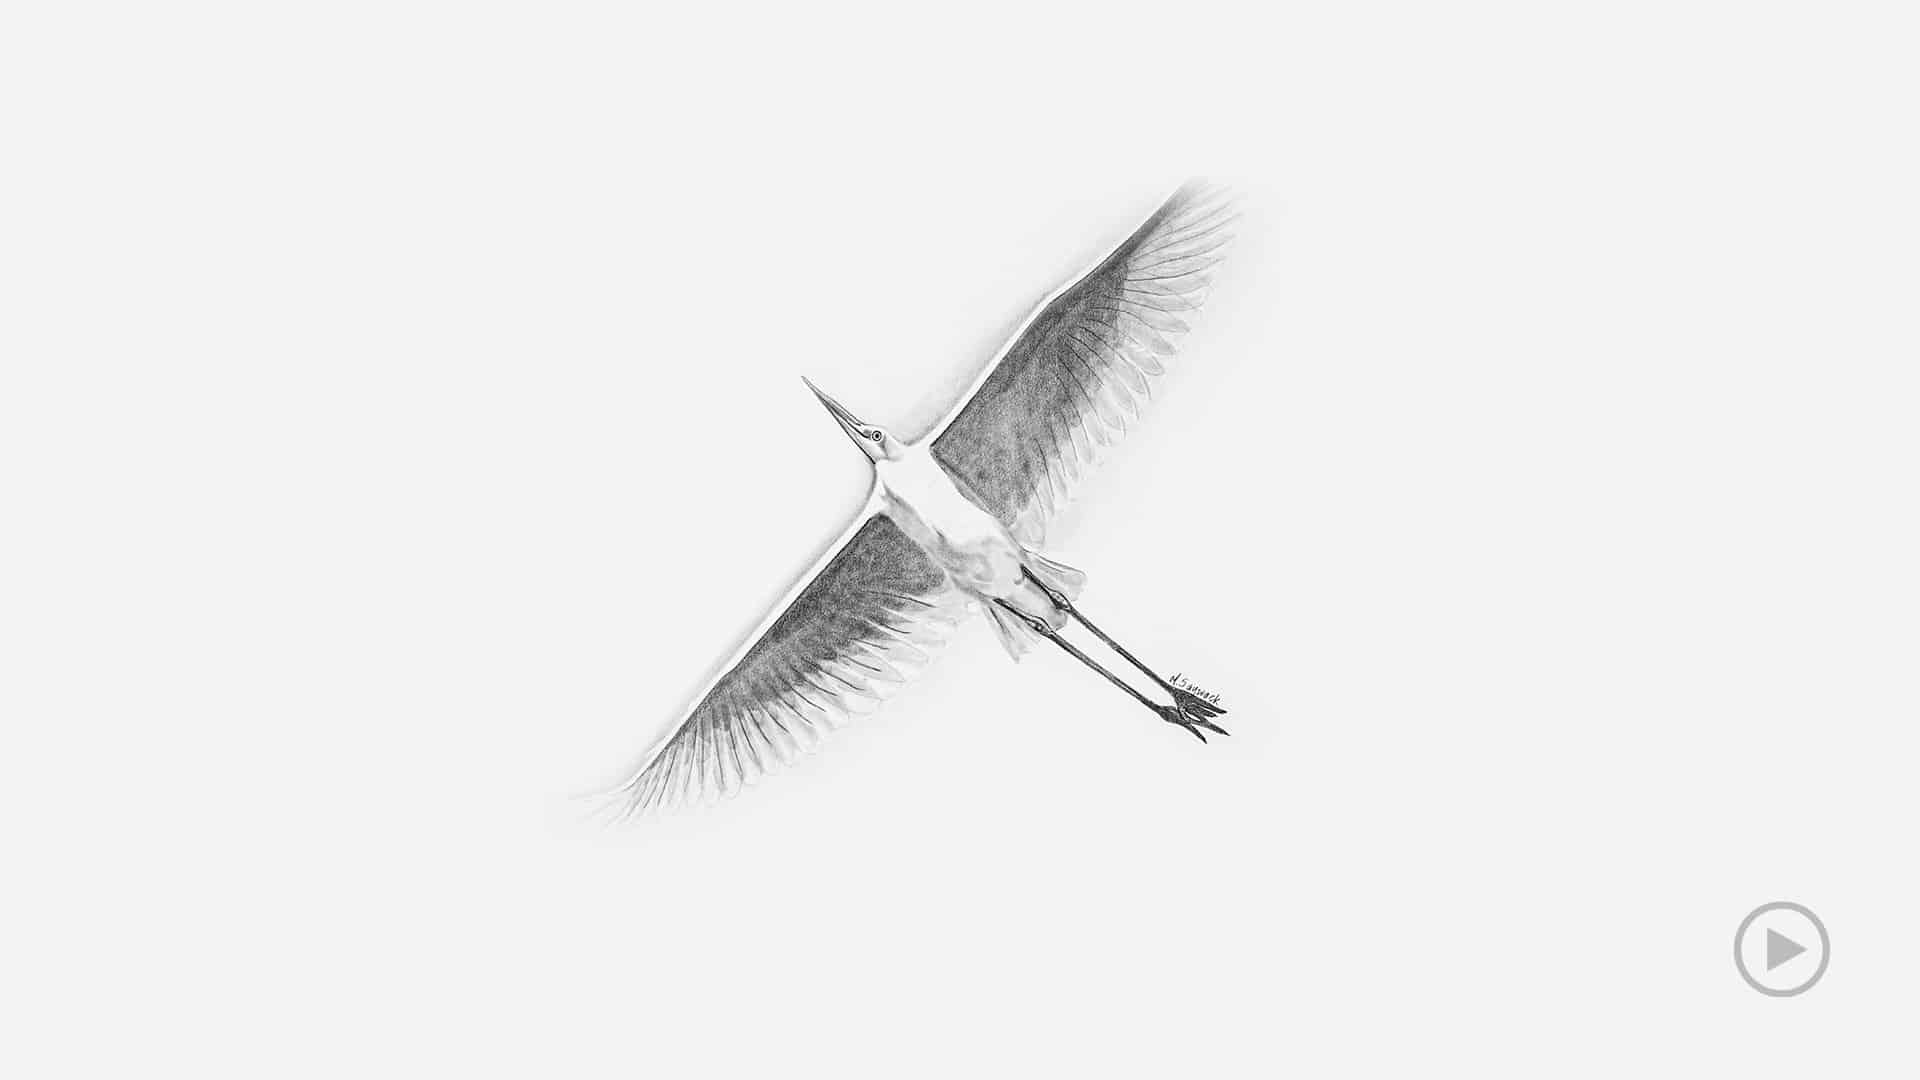 And Egret in flight - a time-lapse pencil drawing video. Artful relaxation.